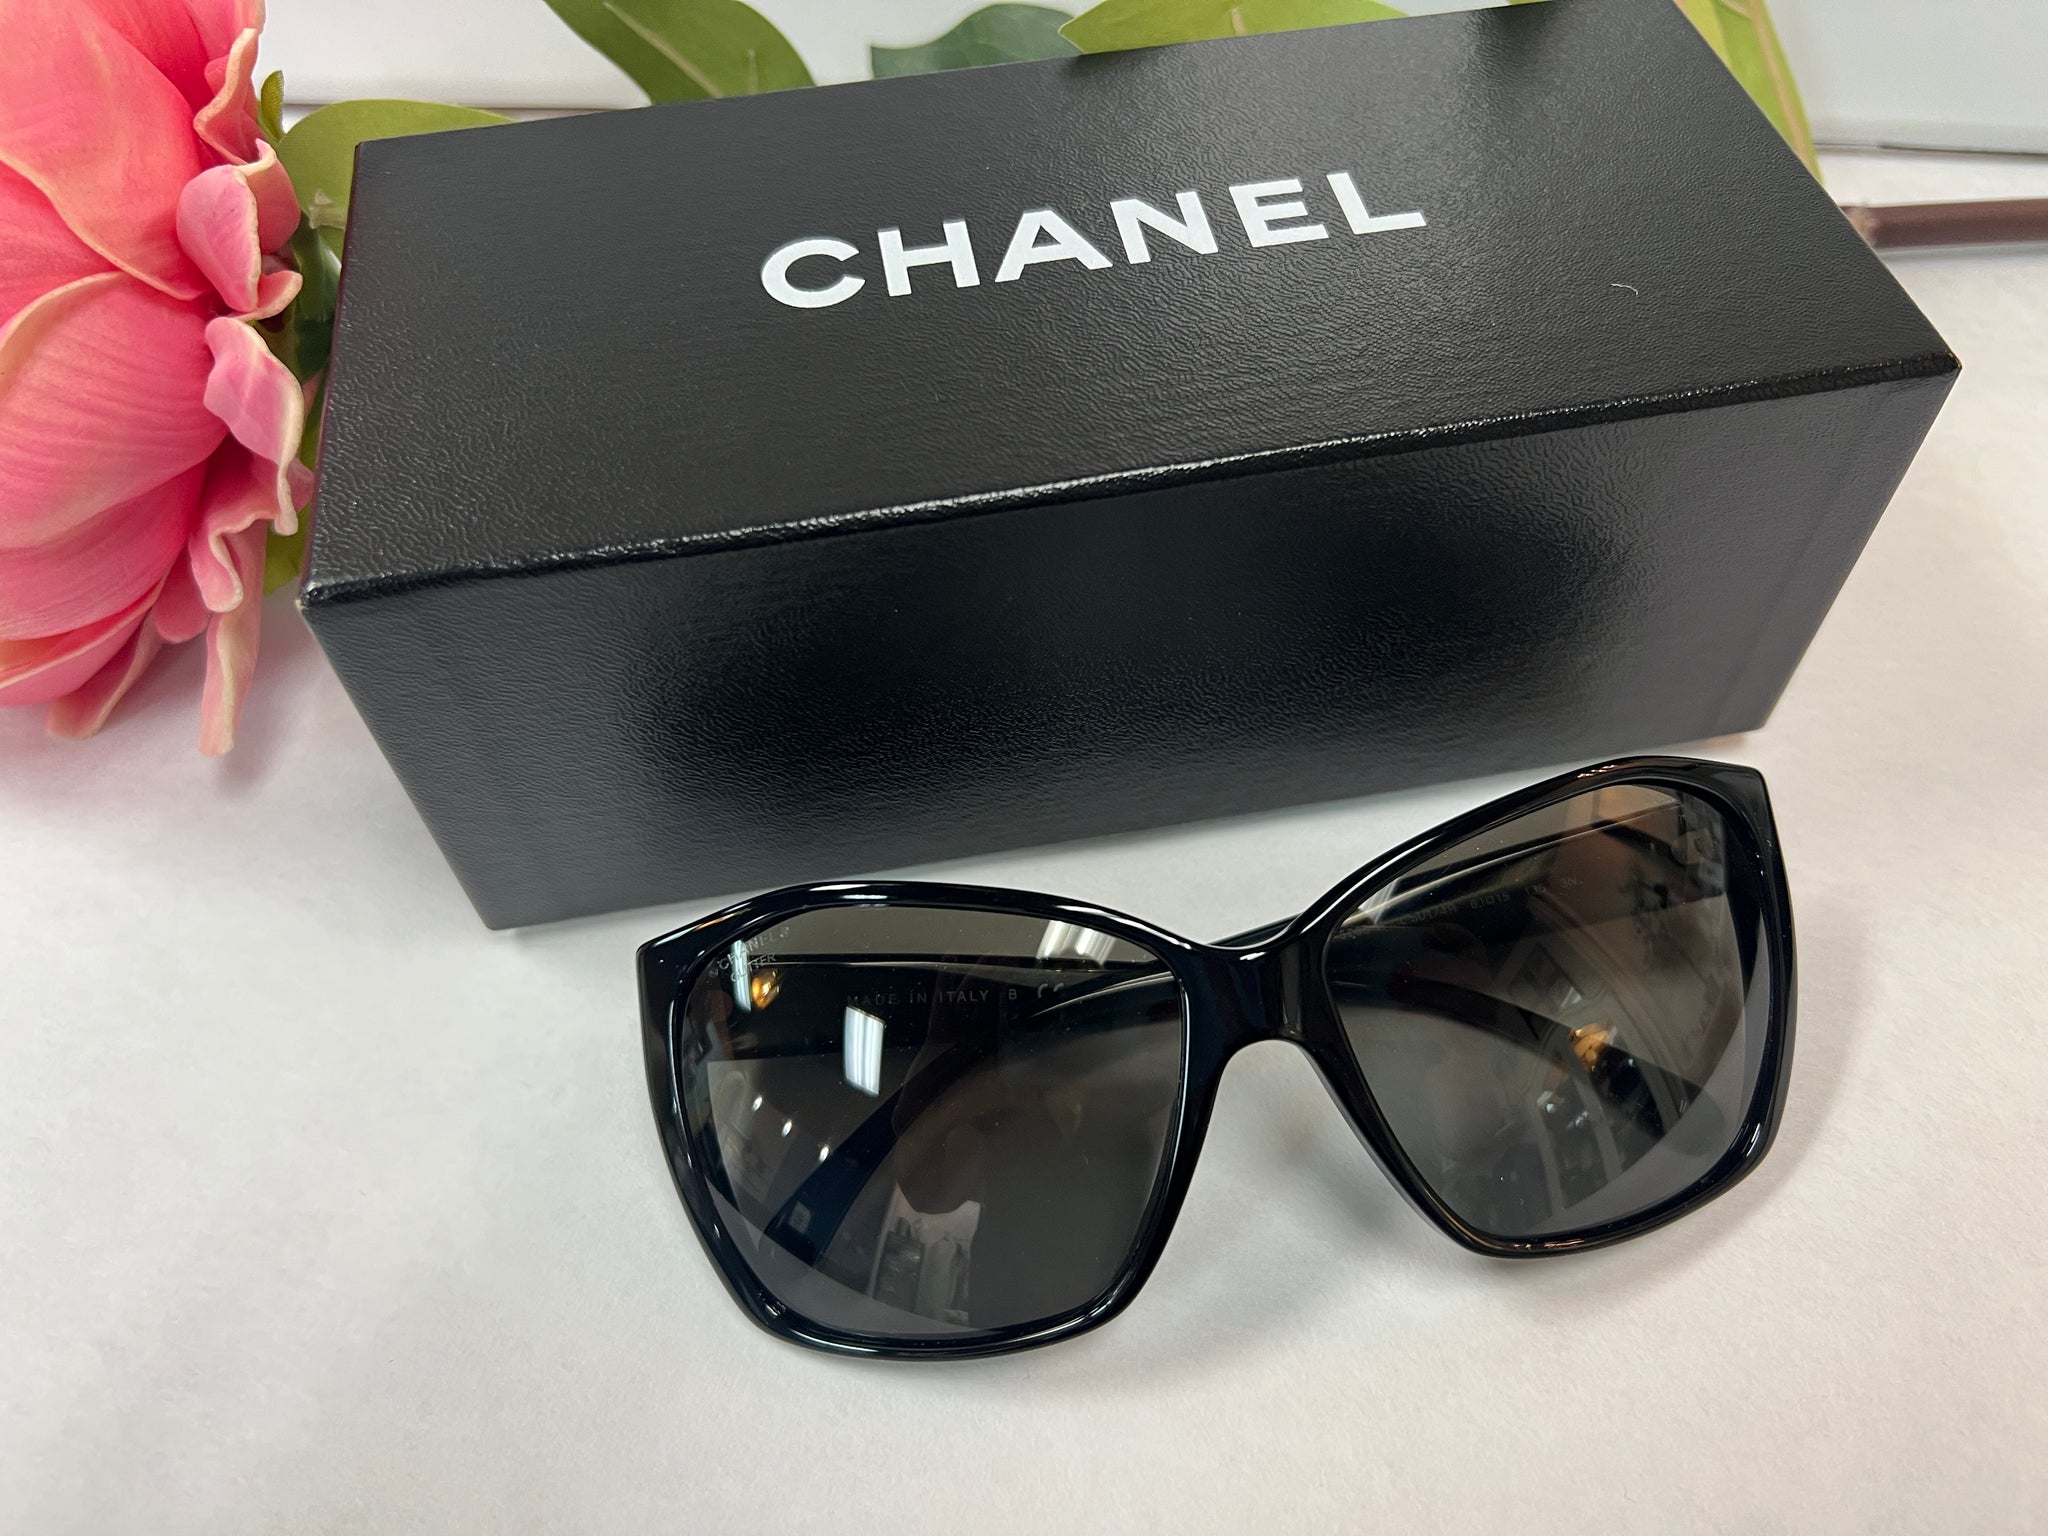 mere og mere Victor detektor Authentic Chanel Sunglasses Black 5203A w/Case – Relics to Rhinestones